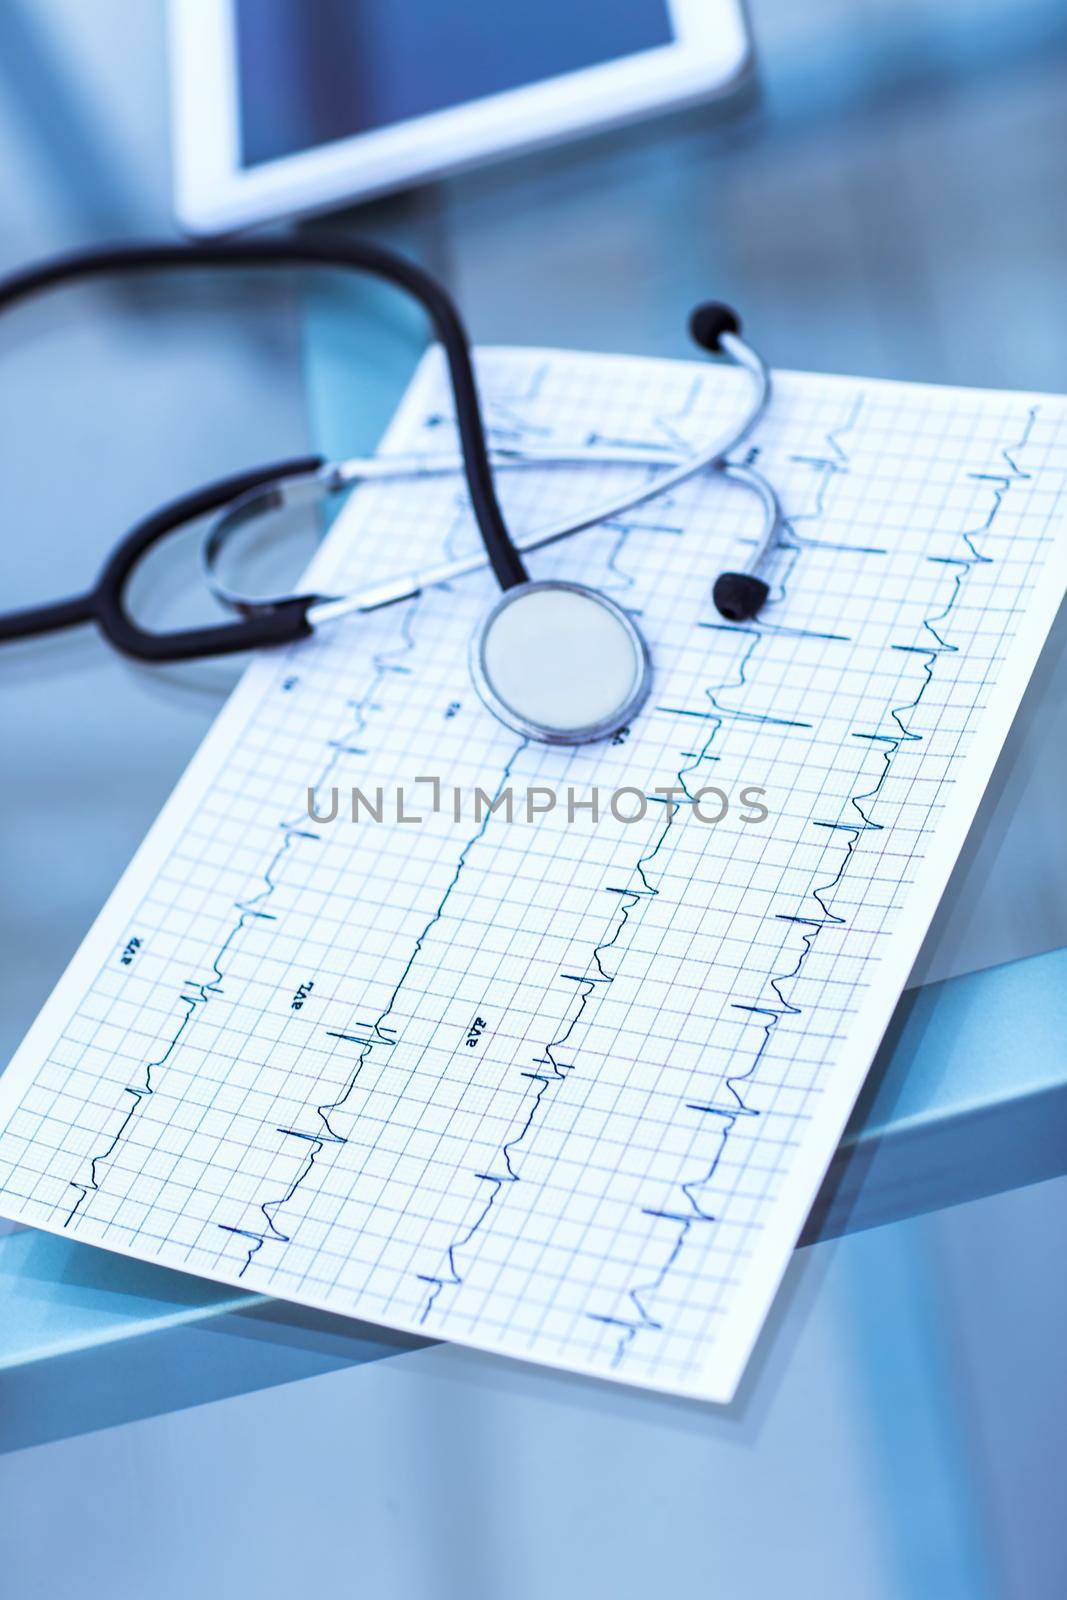 stethoscope and electrocardiogram on the table from the therapist.the photo is a blank space for your text